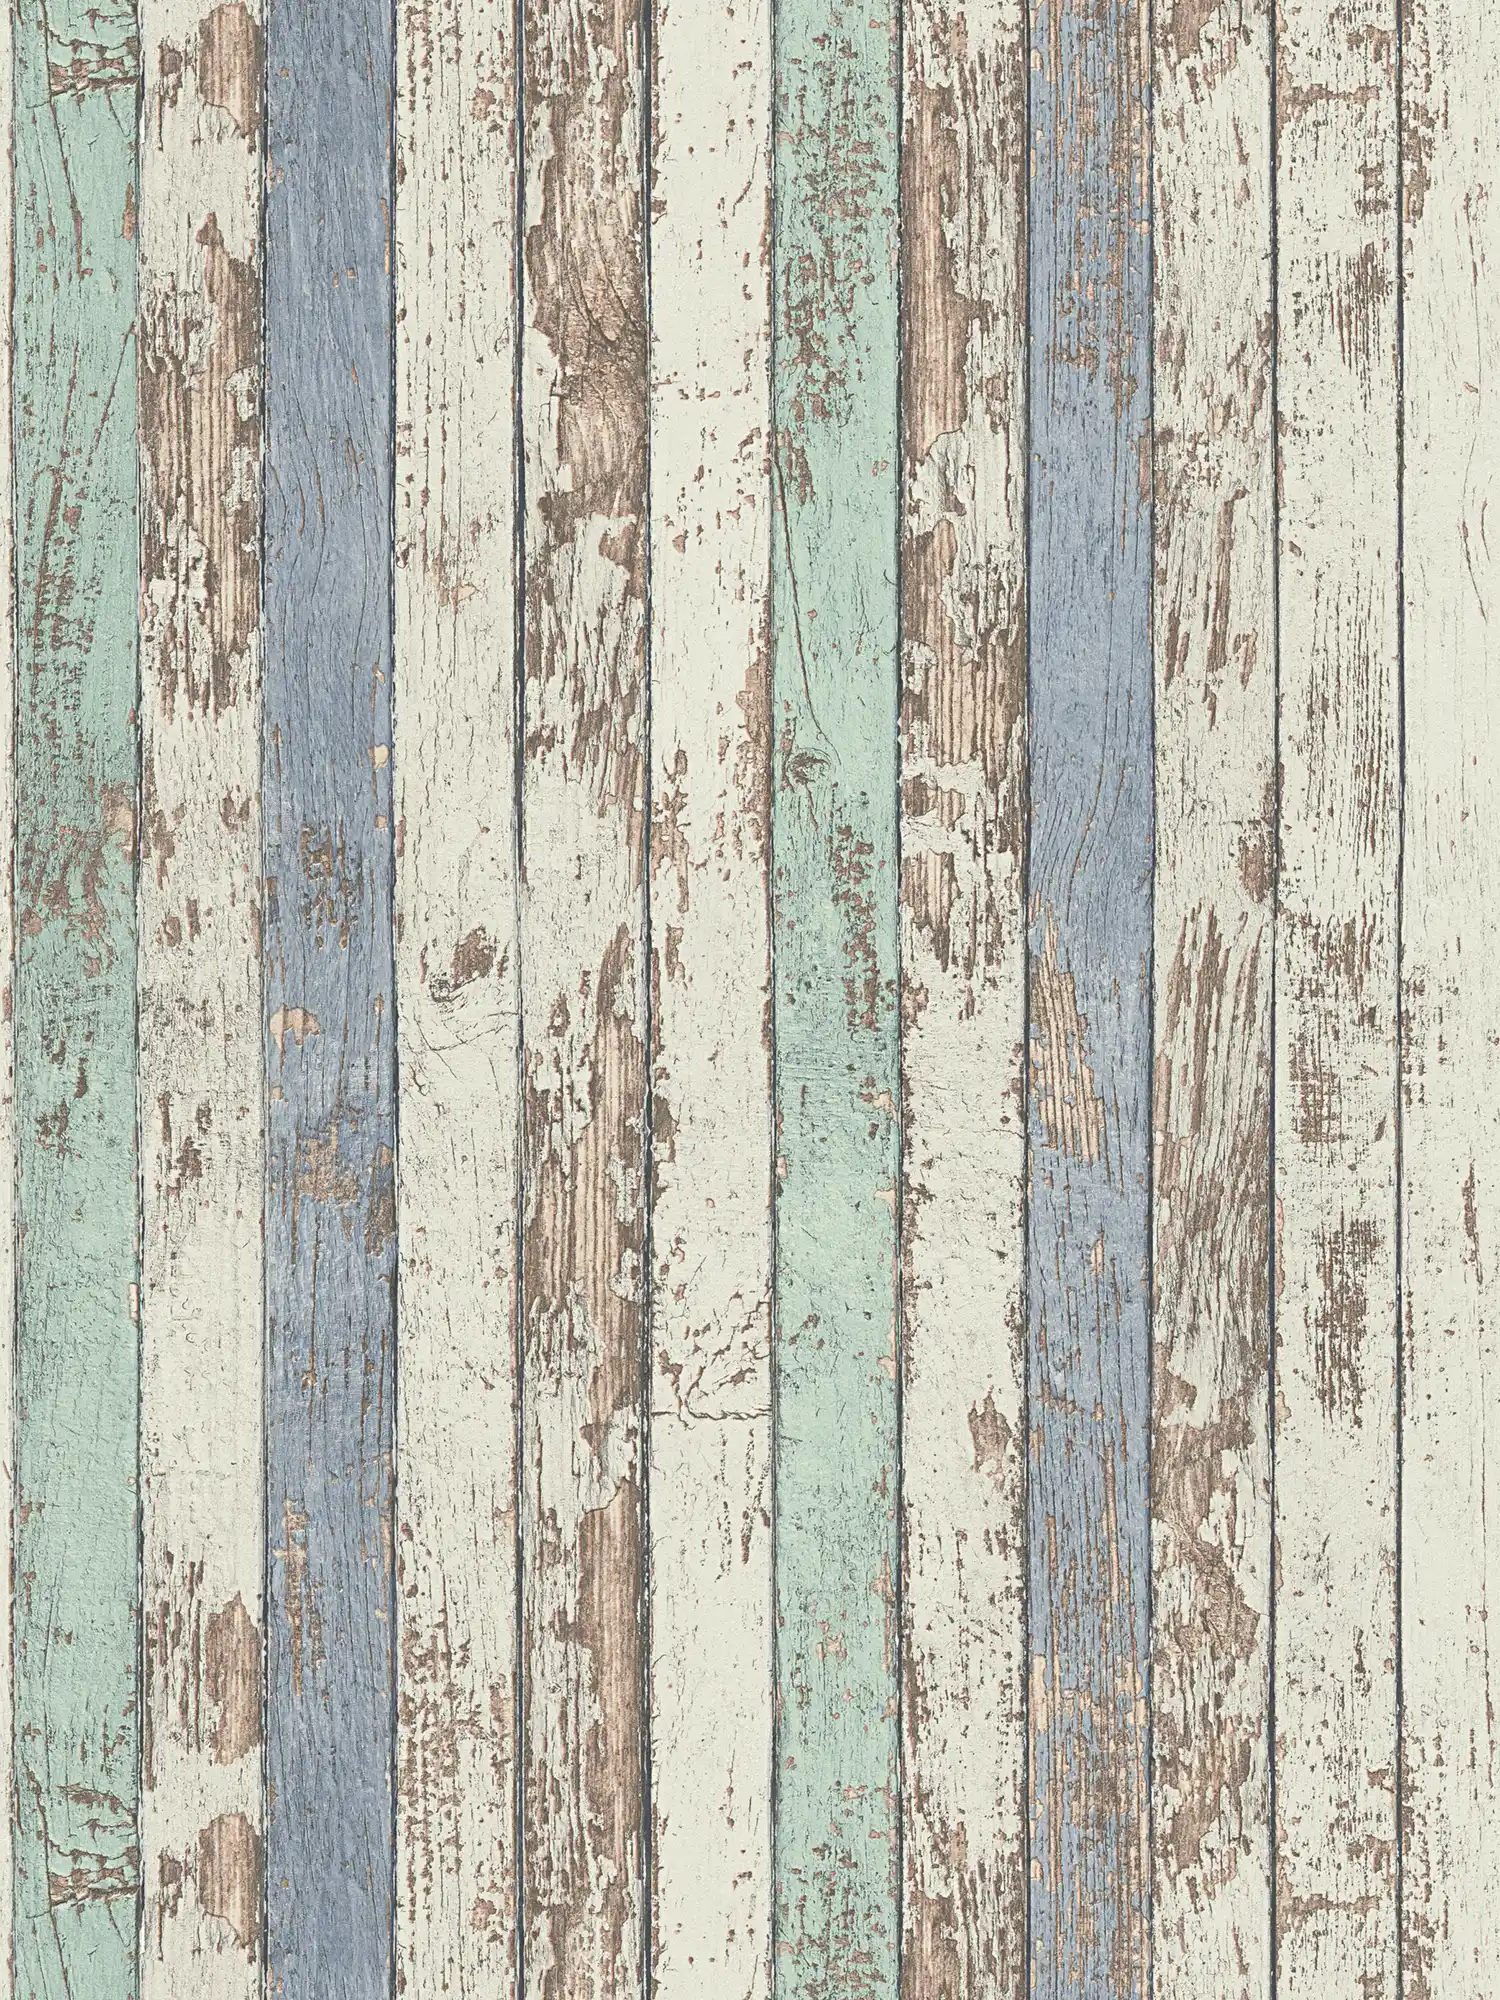         Wooden wallpaper with colourful board motif in shabby chic style - white, brown, blue
    